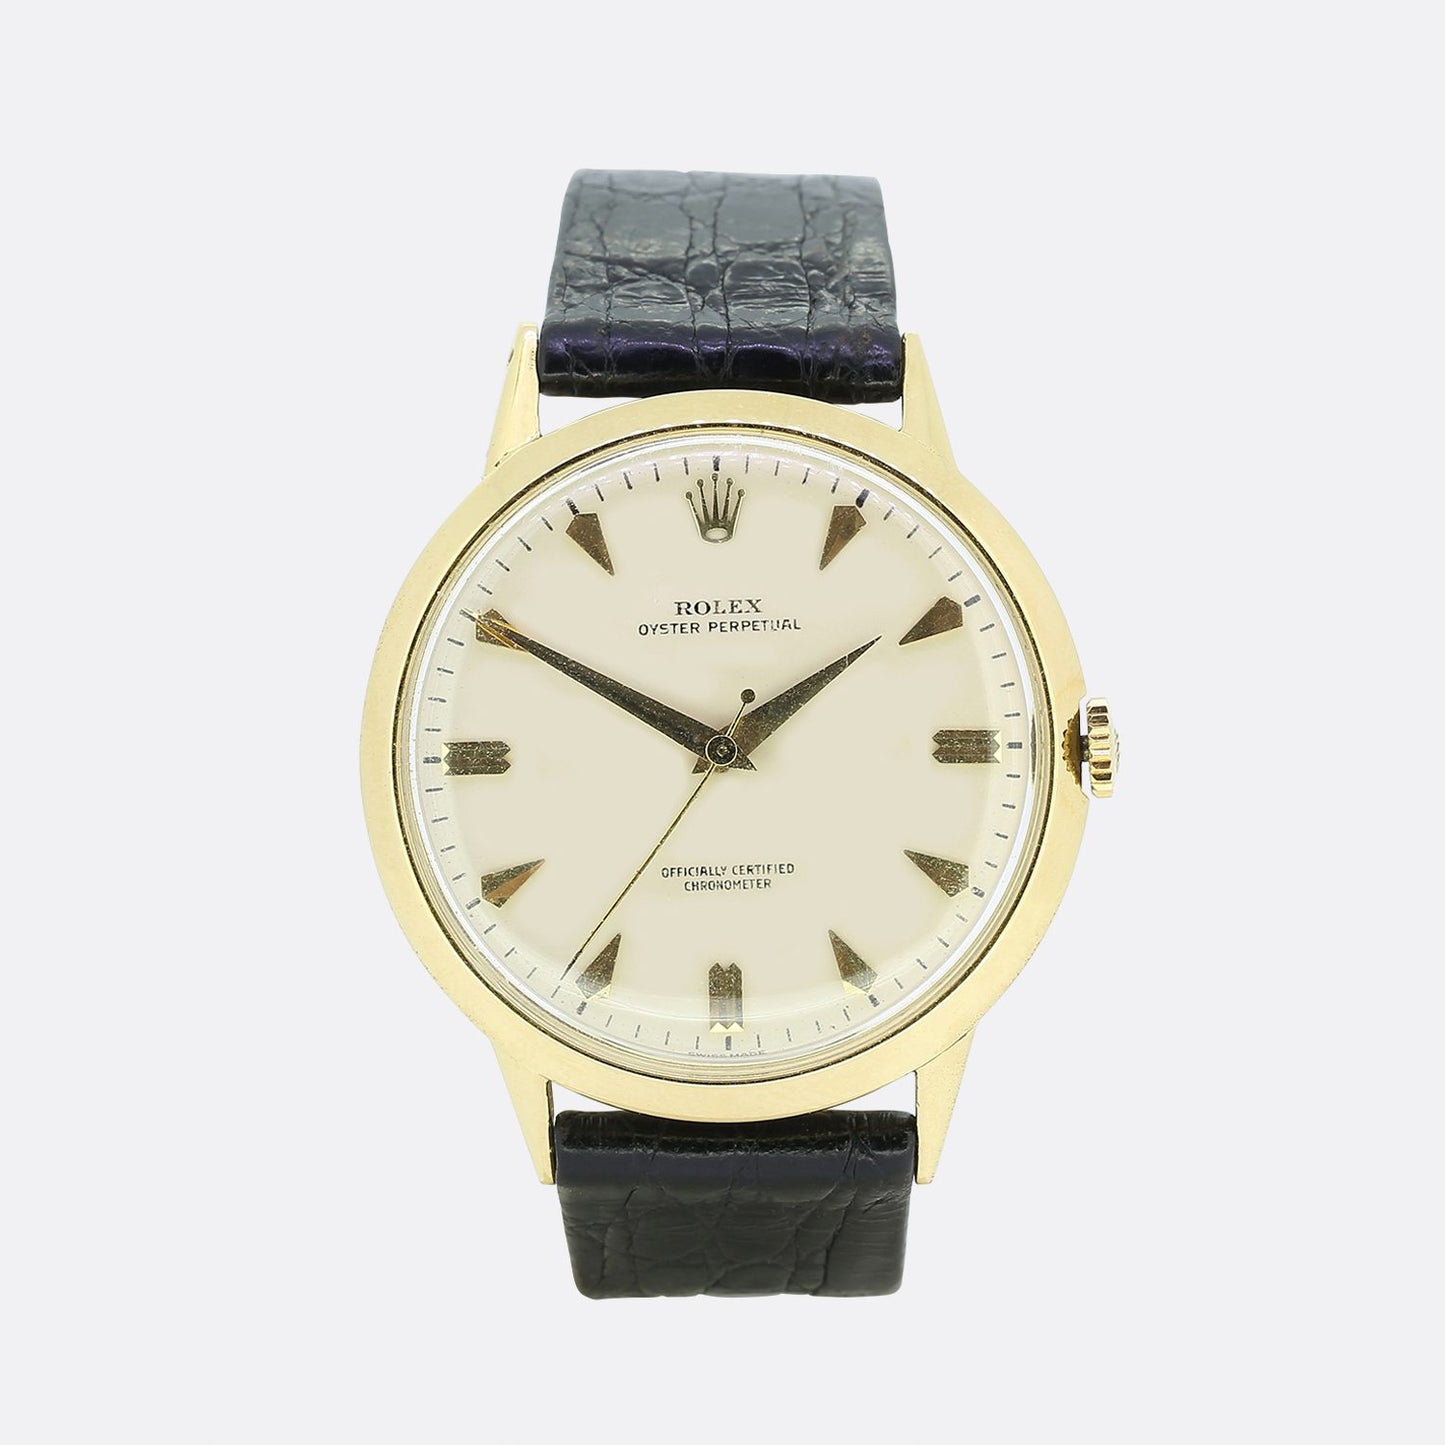 Vintage Rolex Oyster Perpetual Gents Wristwatch